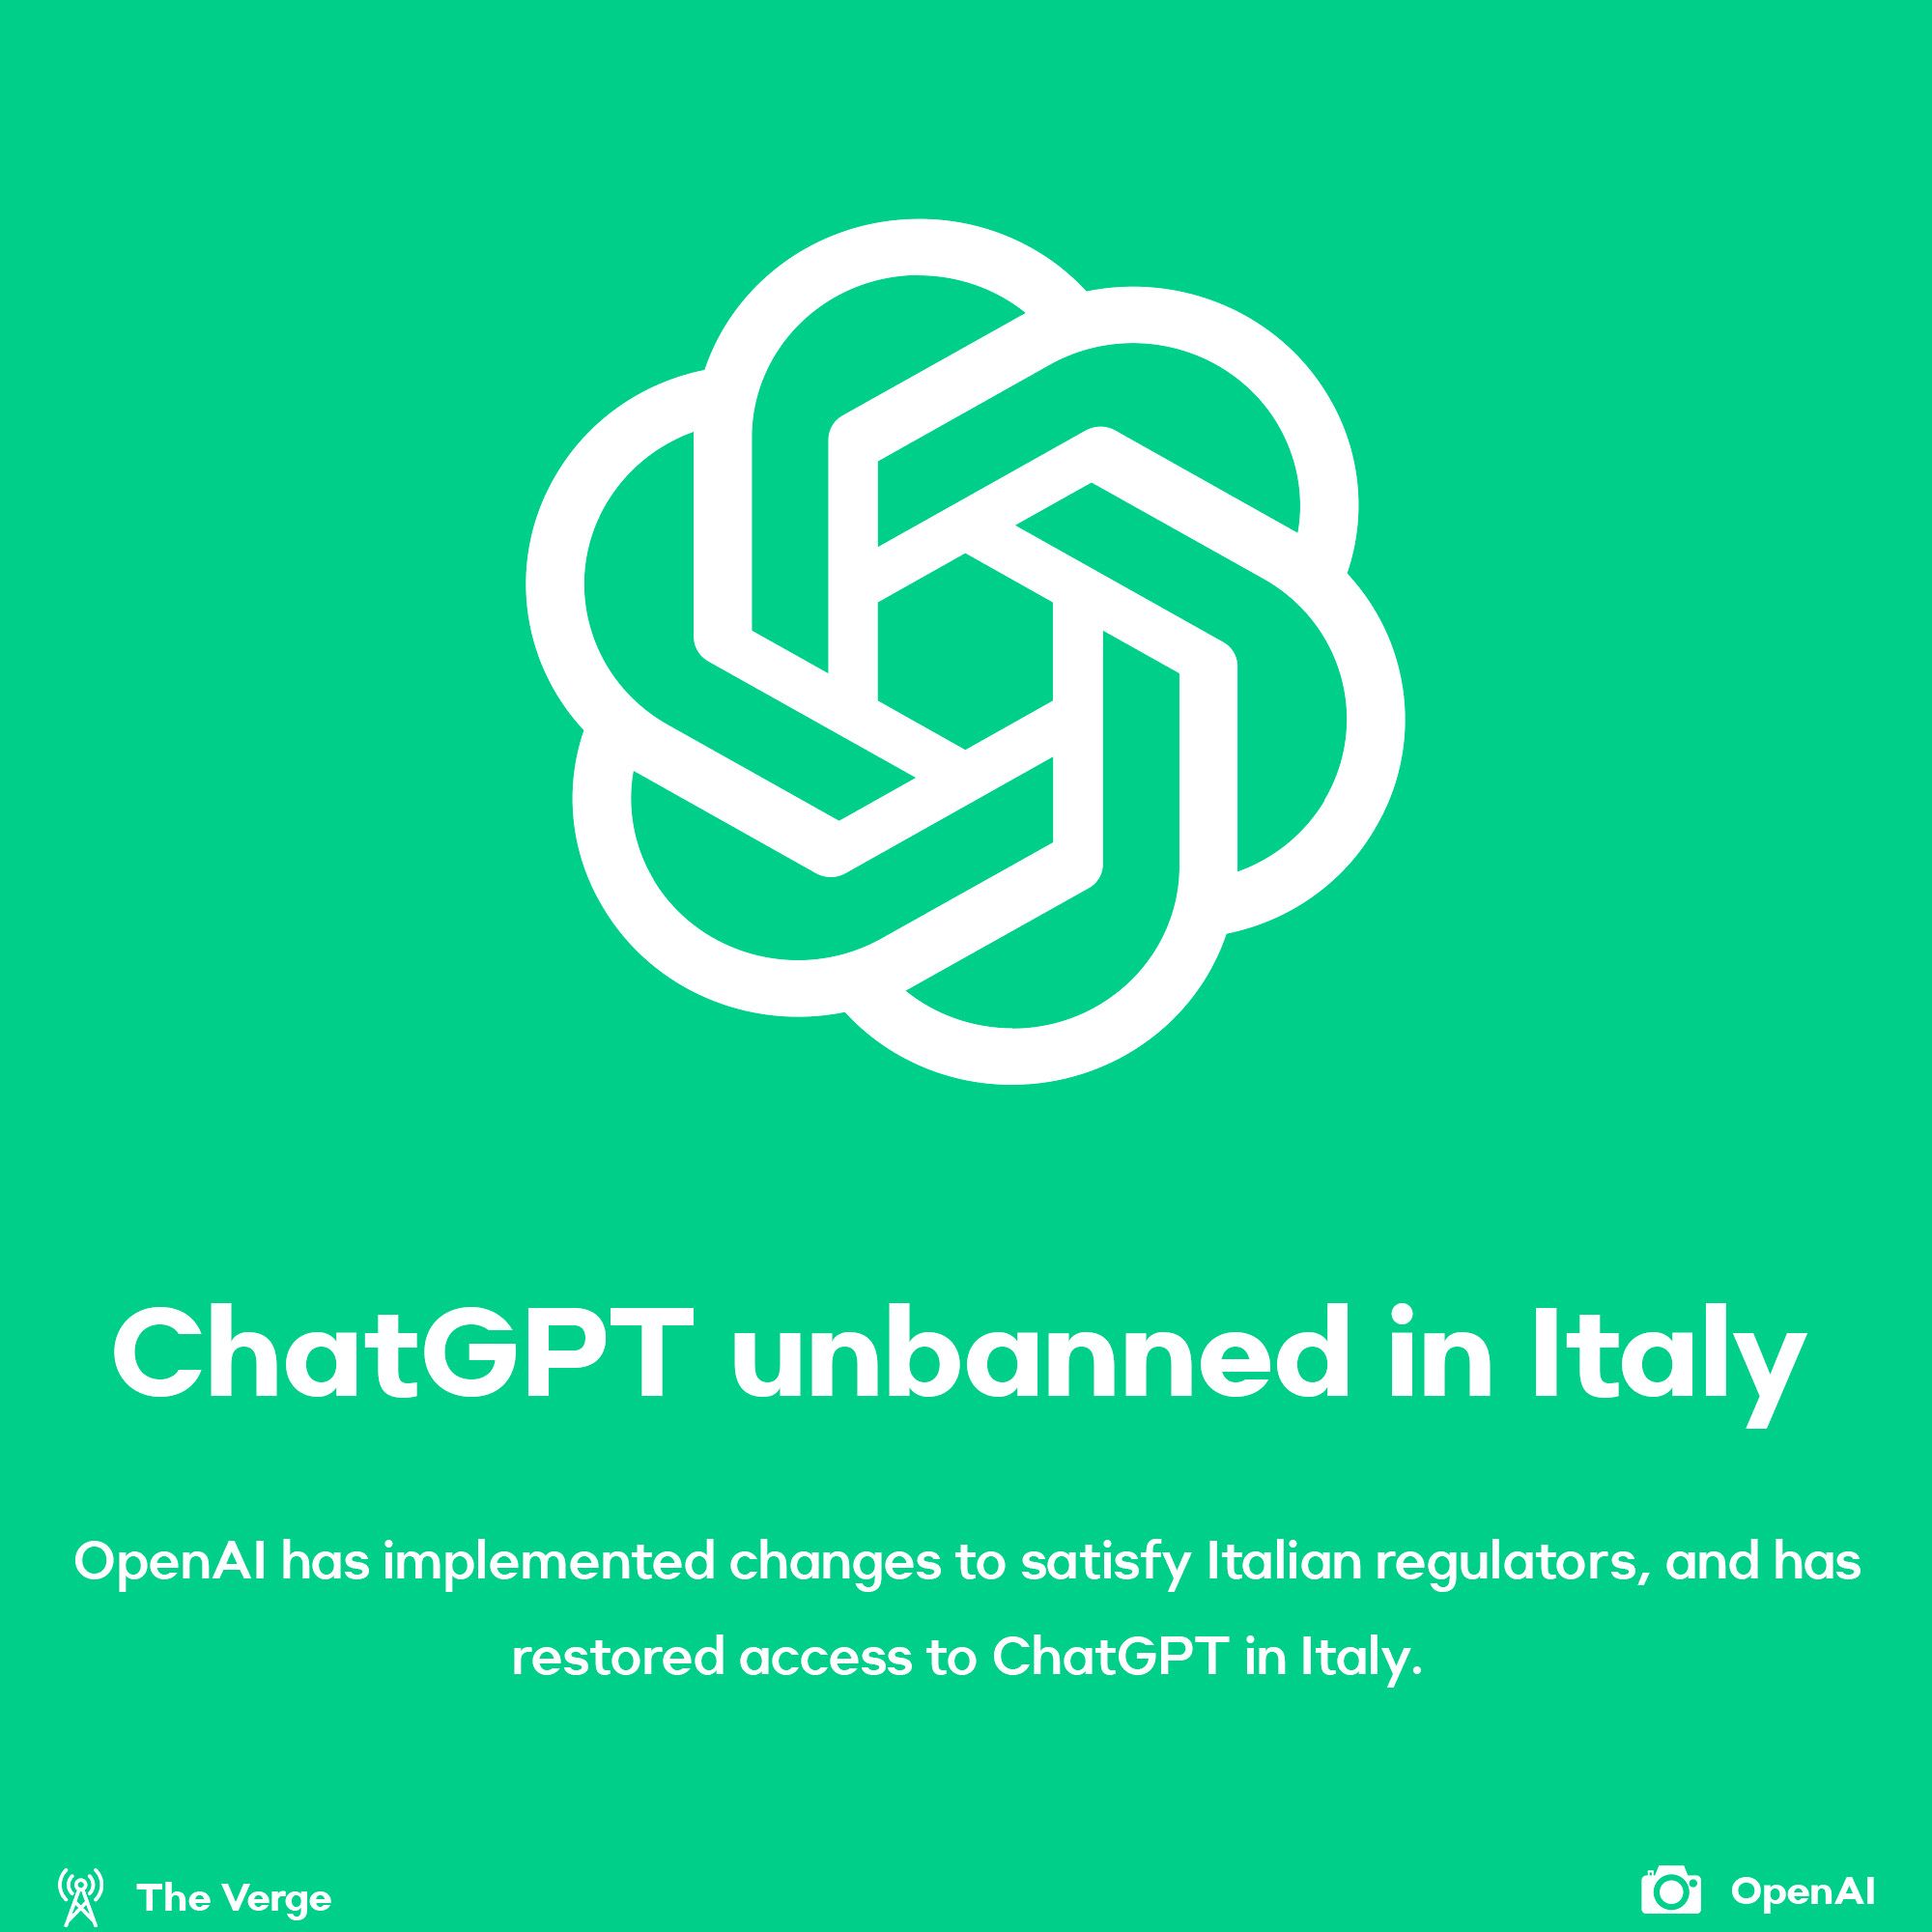 ChatGPT unbanned in Italy